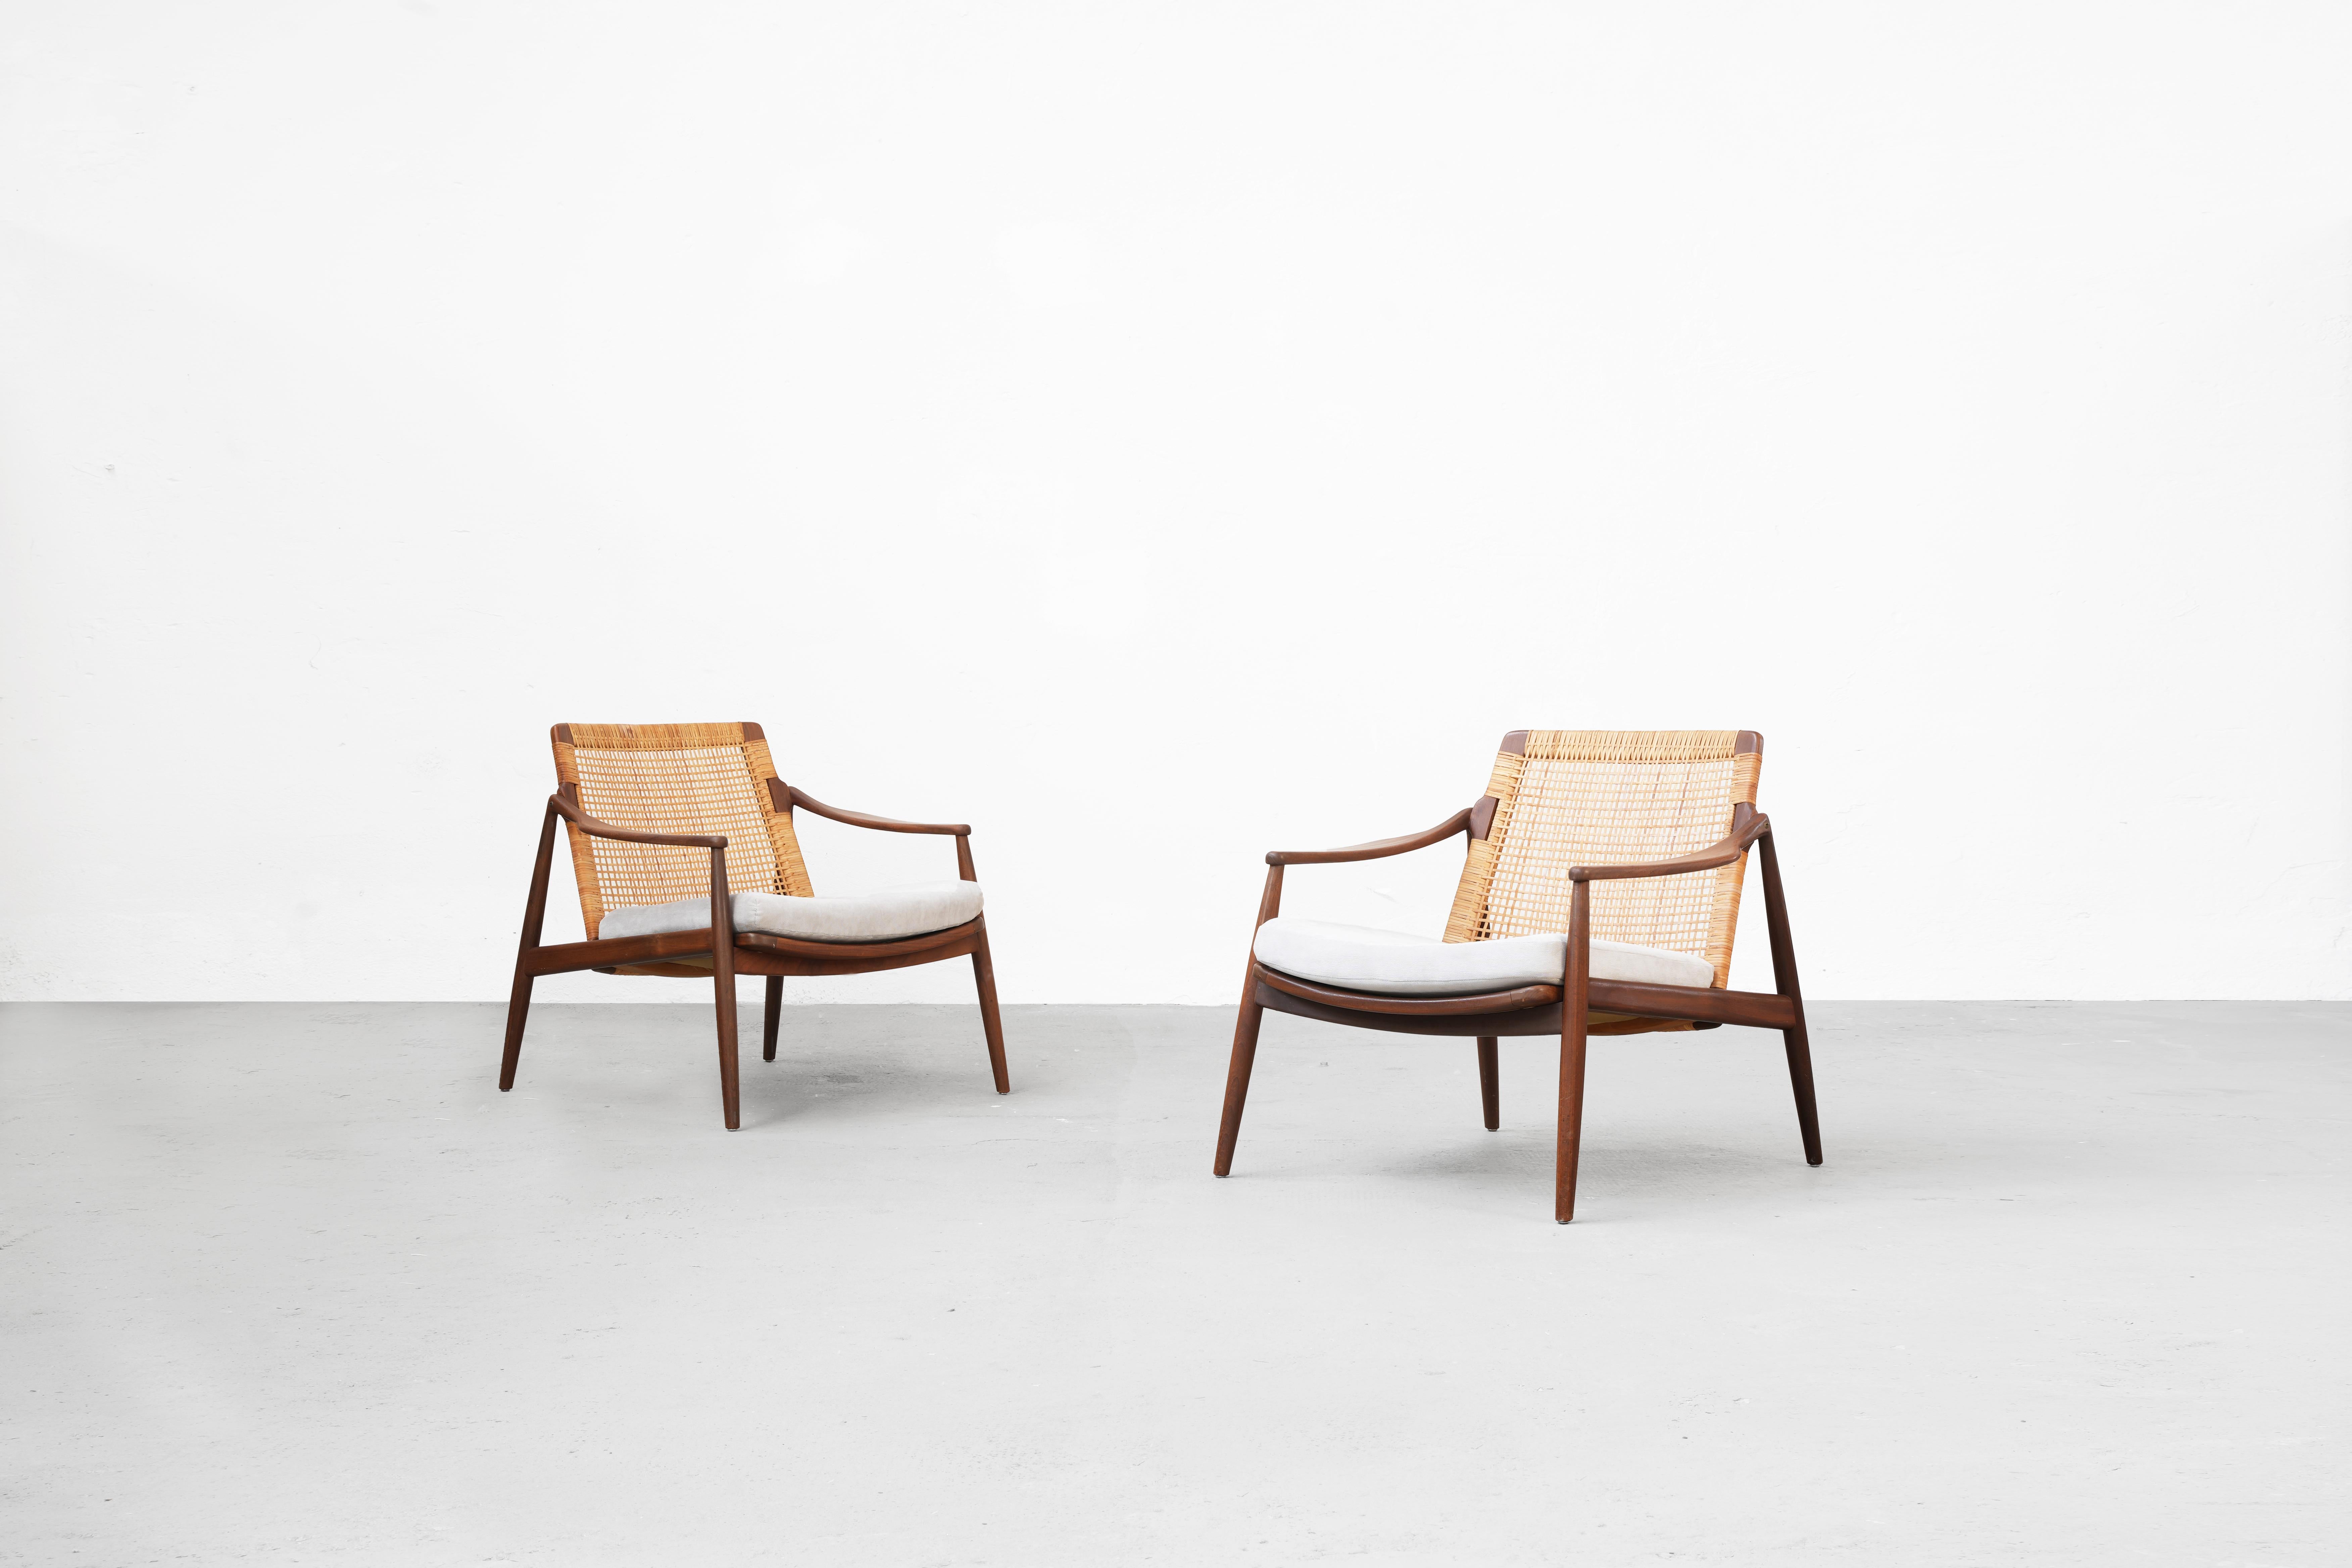 Very rare and beautiful pair of lounge chairs designed by Hartmut Lohmeyer for Wilkhahn in the 1950s, made in Germany. 
Beautifully shaped and newly reupholstered with light gray fabric. The cane mesh and the teak wood frame are in good condition.